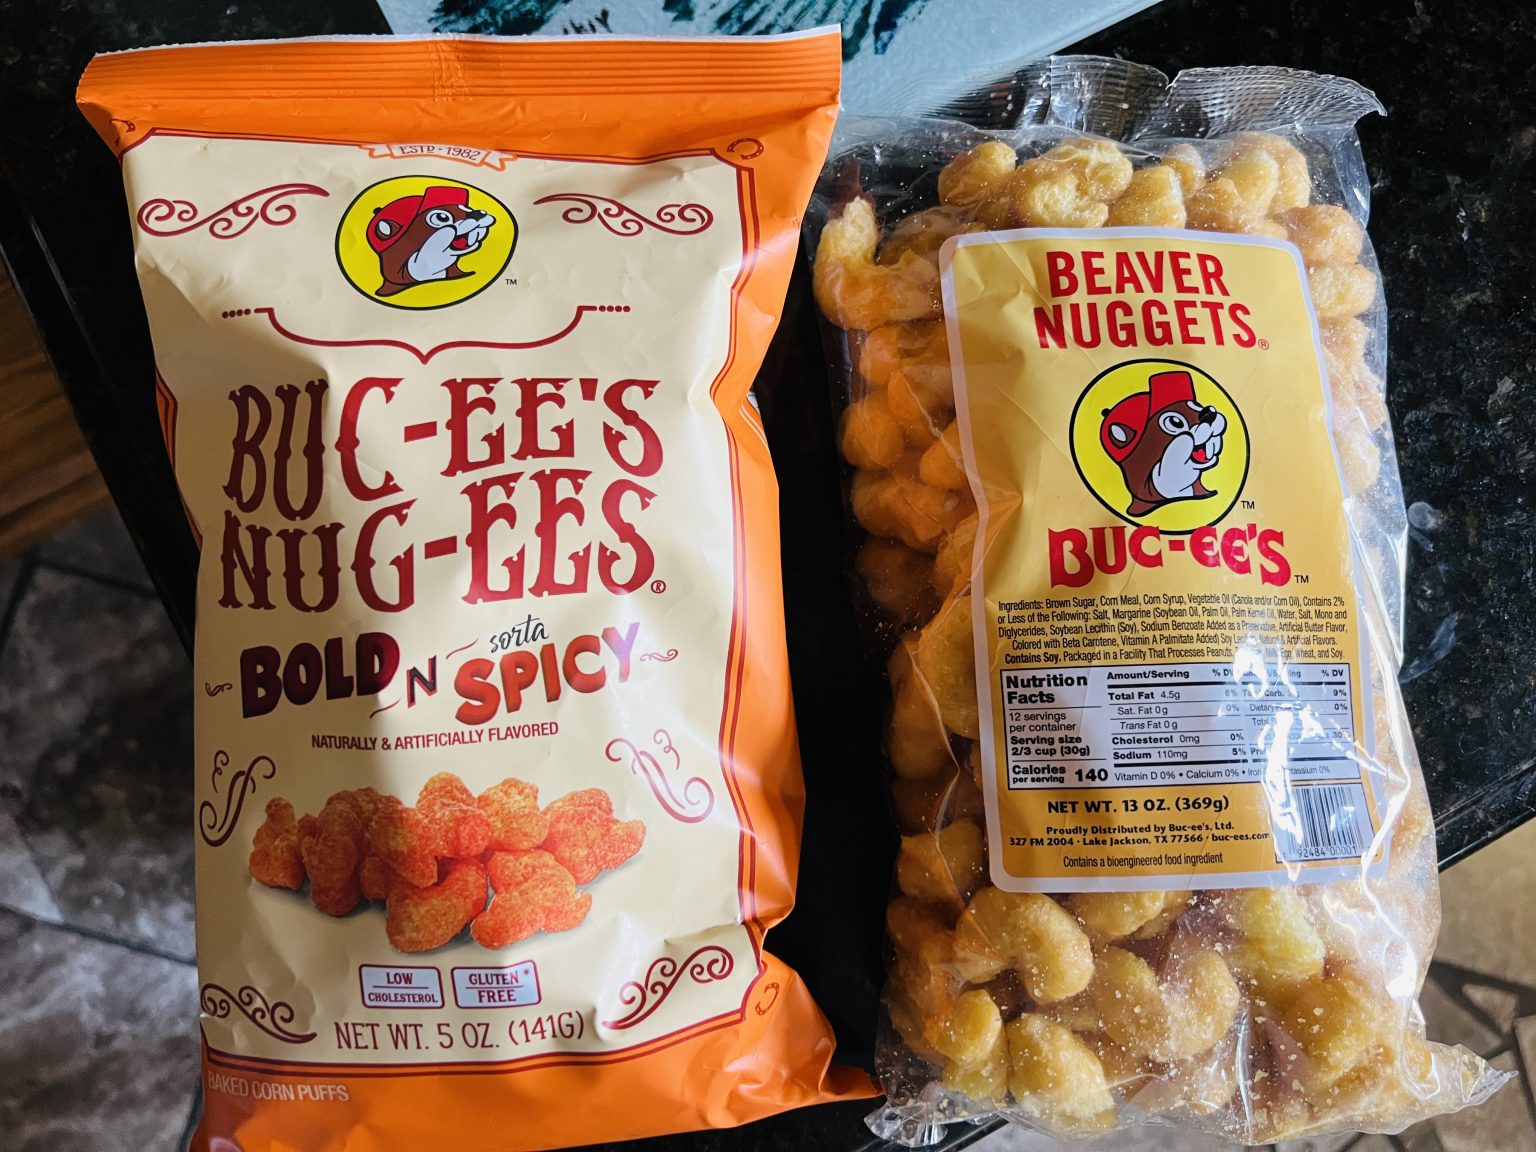 Our favorite road trip snacks from Buc-ees!